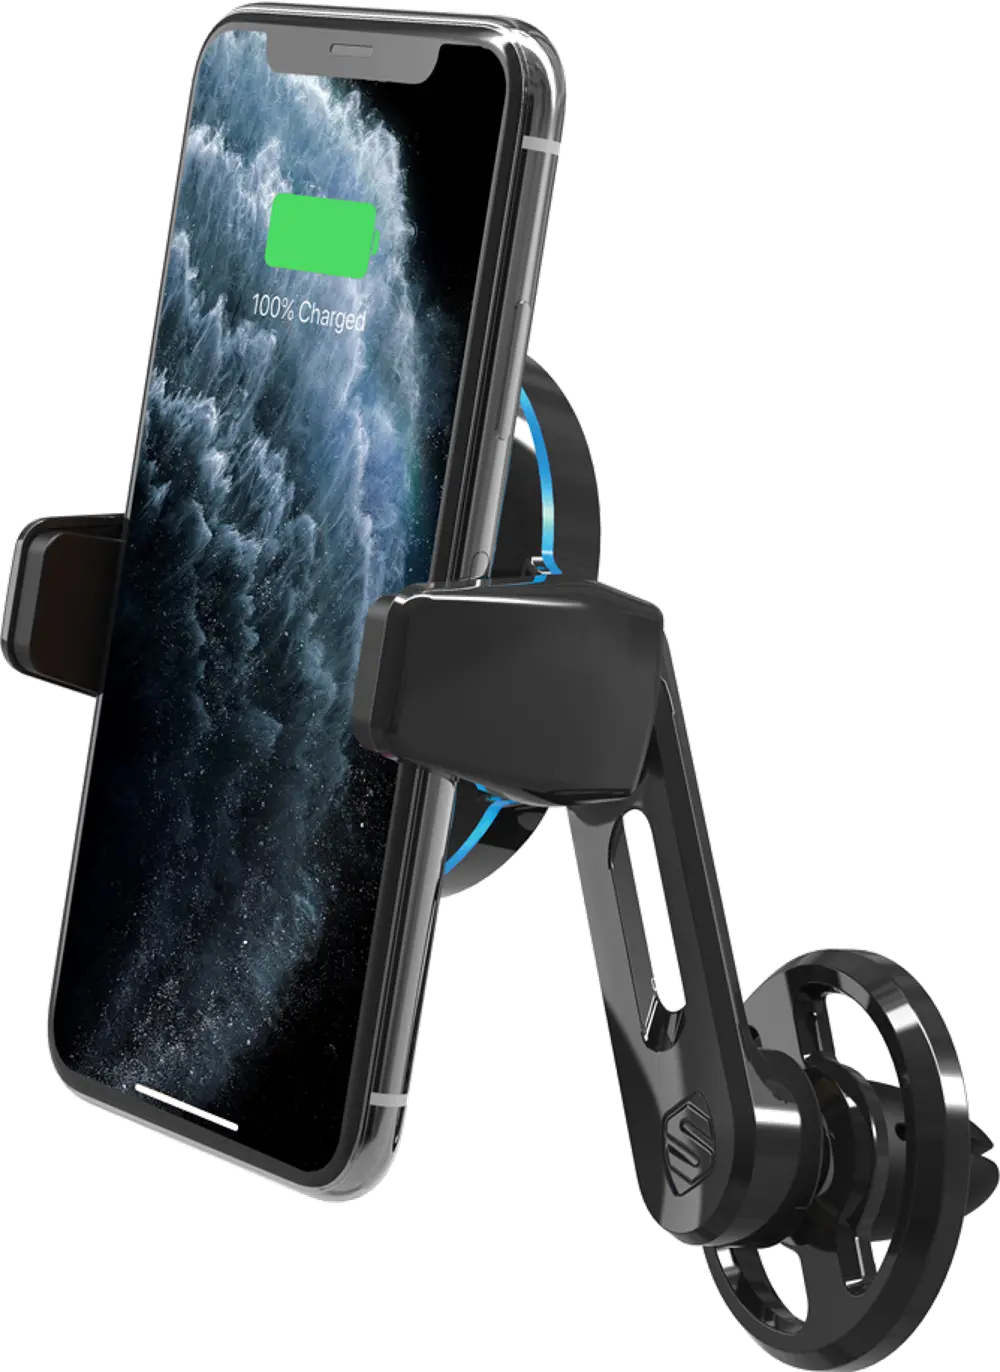 MGQVP-XTET,QMOUNT Scosche MagicGrip Charge3 Vent Mount with Qi Wireless Charging-1